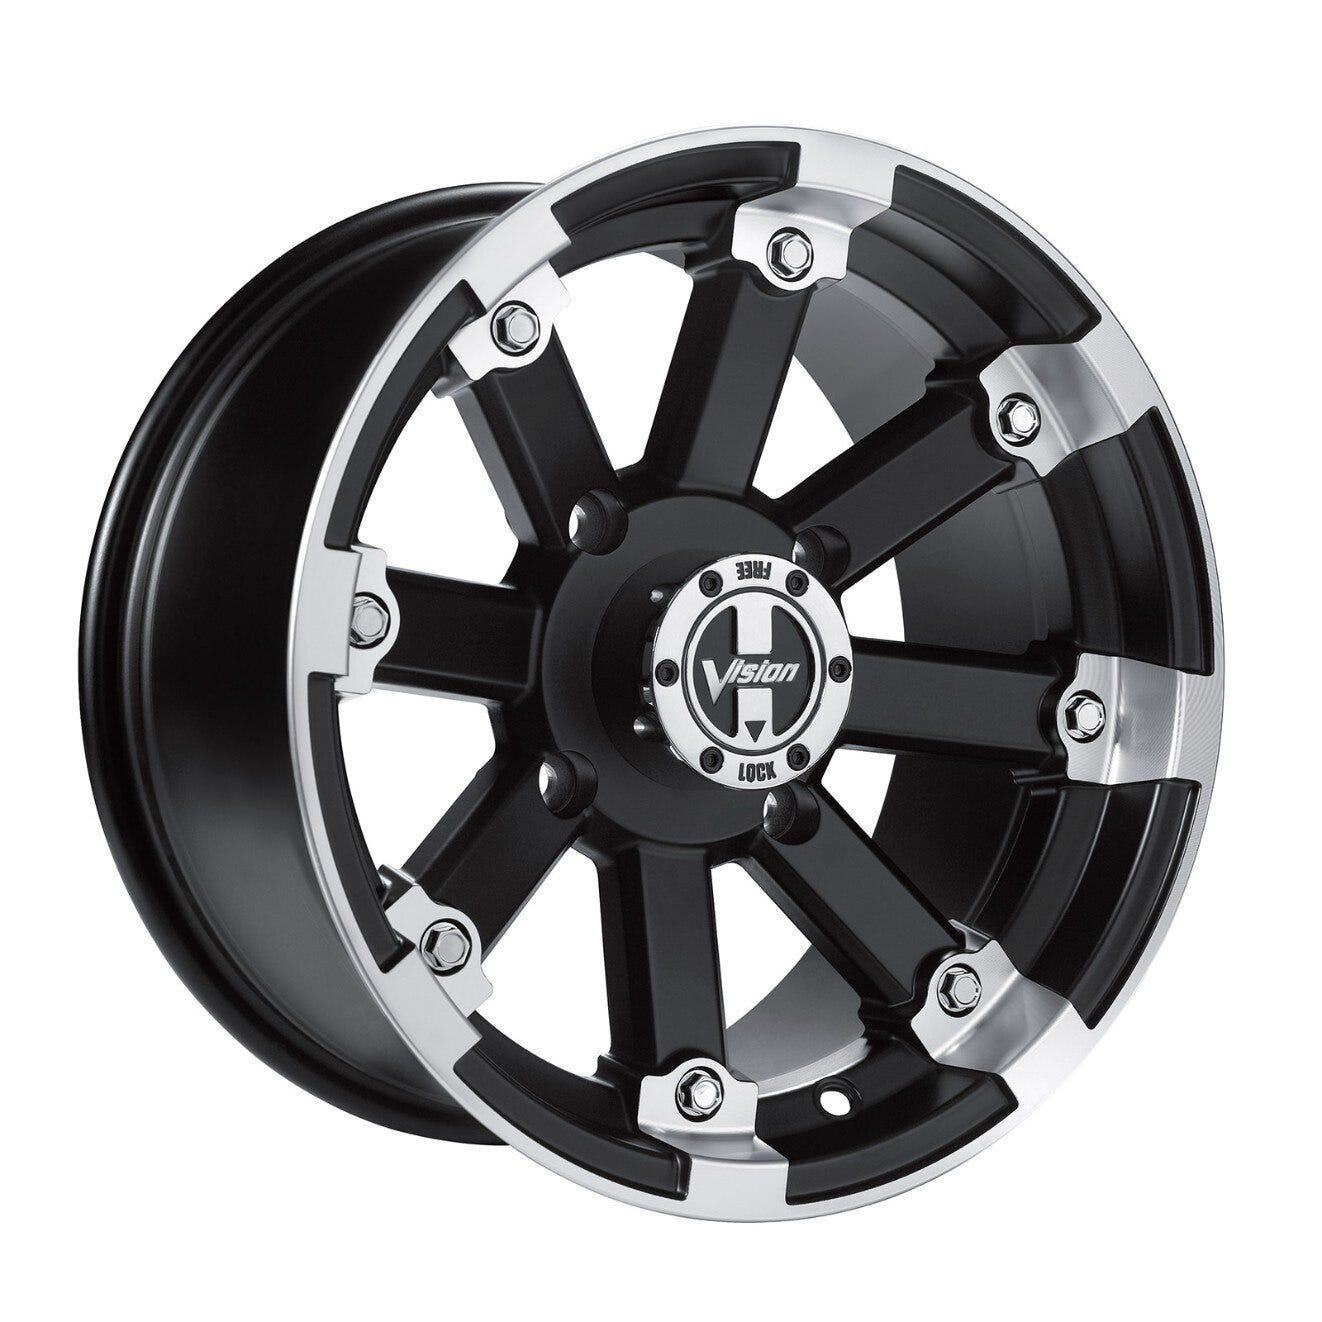 Lockout 393 14" Rim by Vision - Front - Factory Recreation